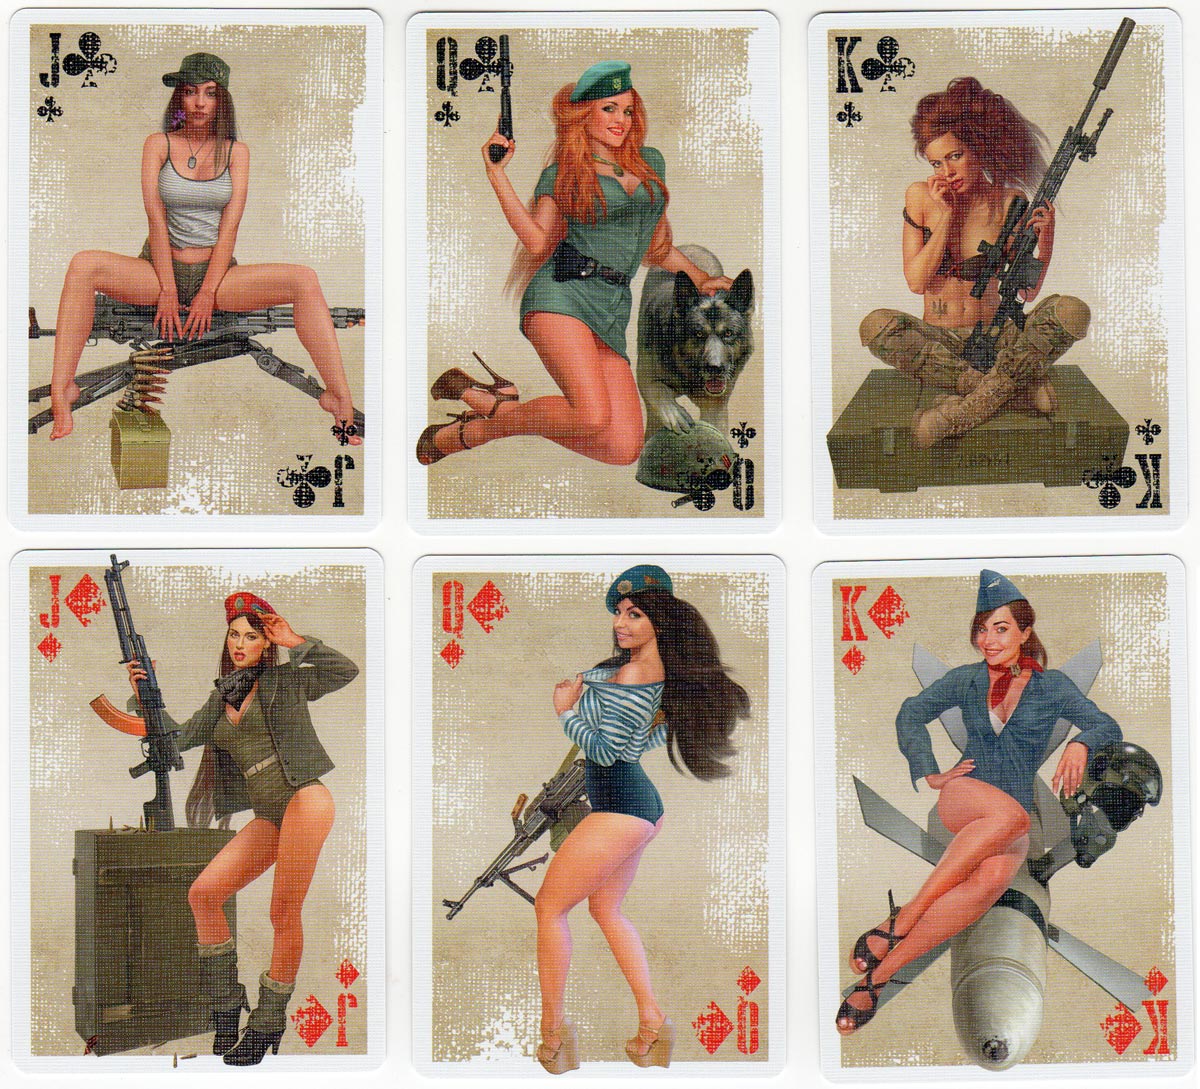 Military Pin Up playing cards created by Sviatoslay Pashchuk, 2019